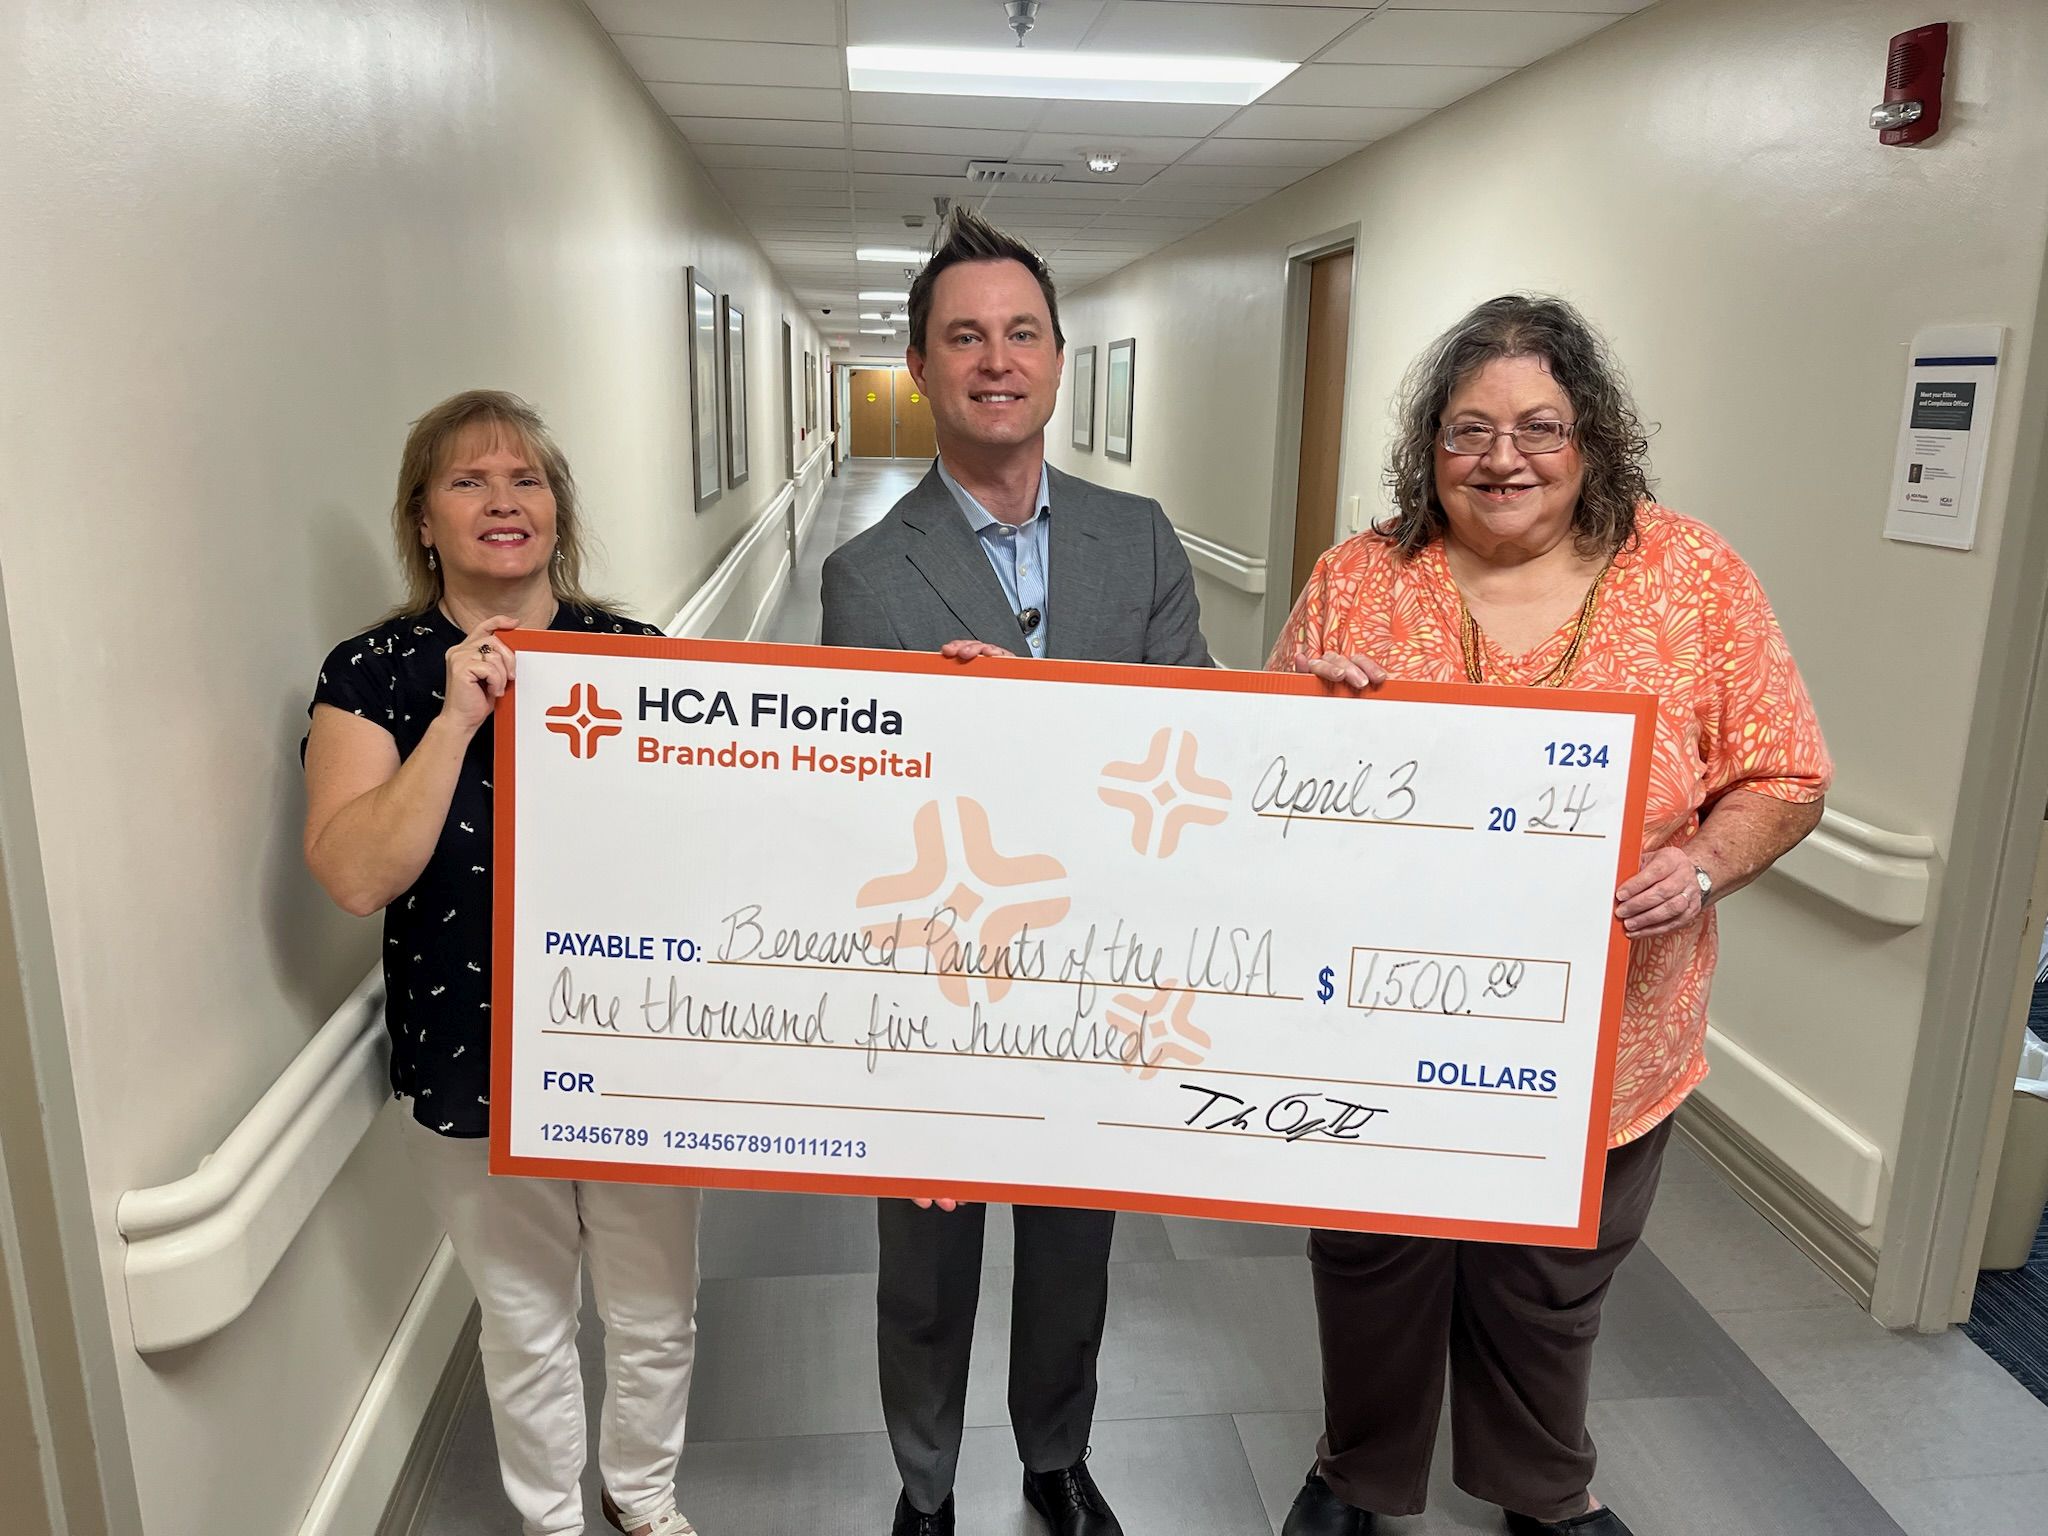 Tripp Owings, CEO of HCA Florida Brandon Hospital presents $1,500 check to leaders of Bereaved Parents USA Tampa Bay.